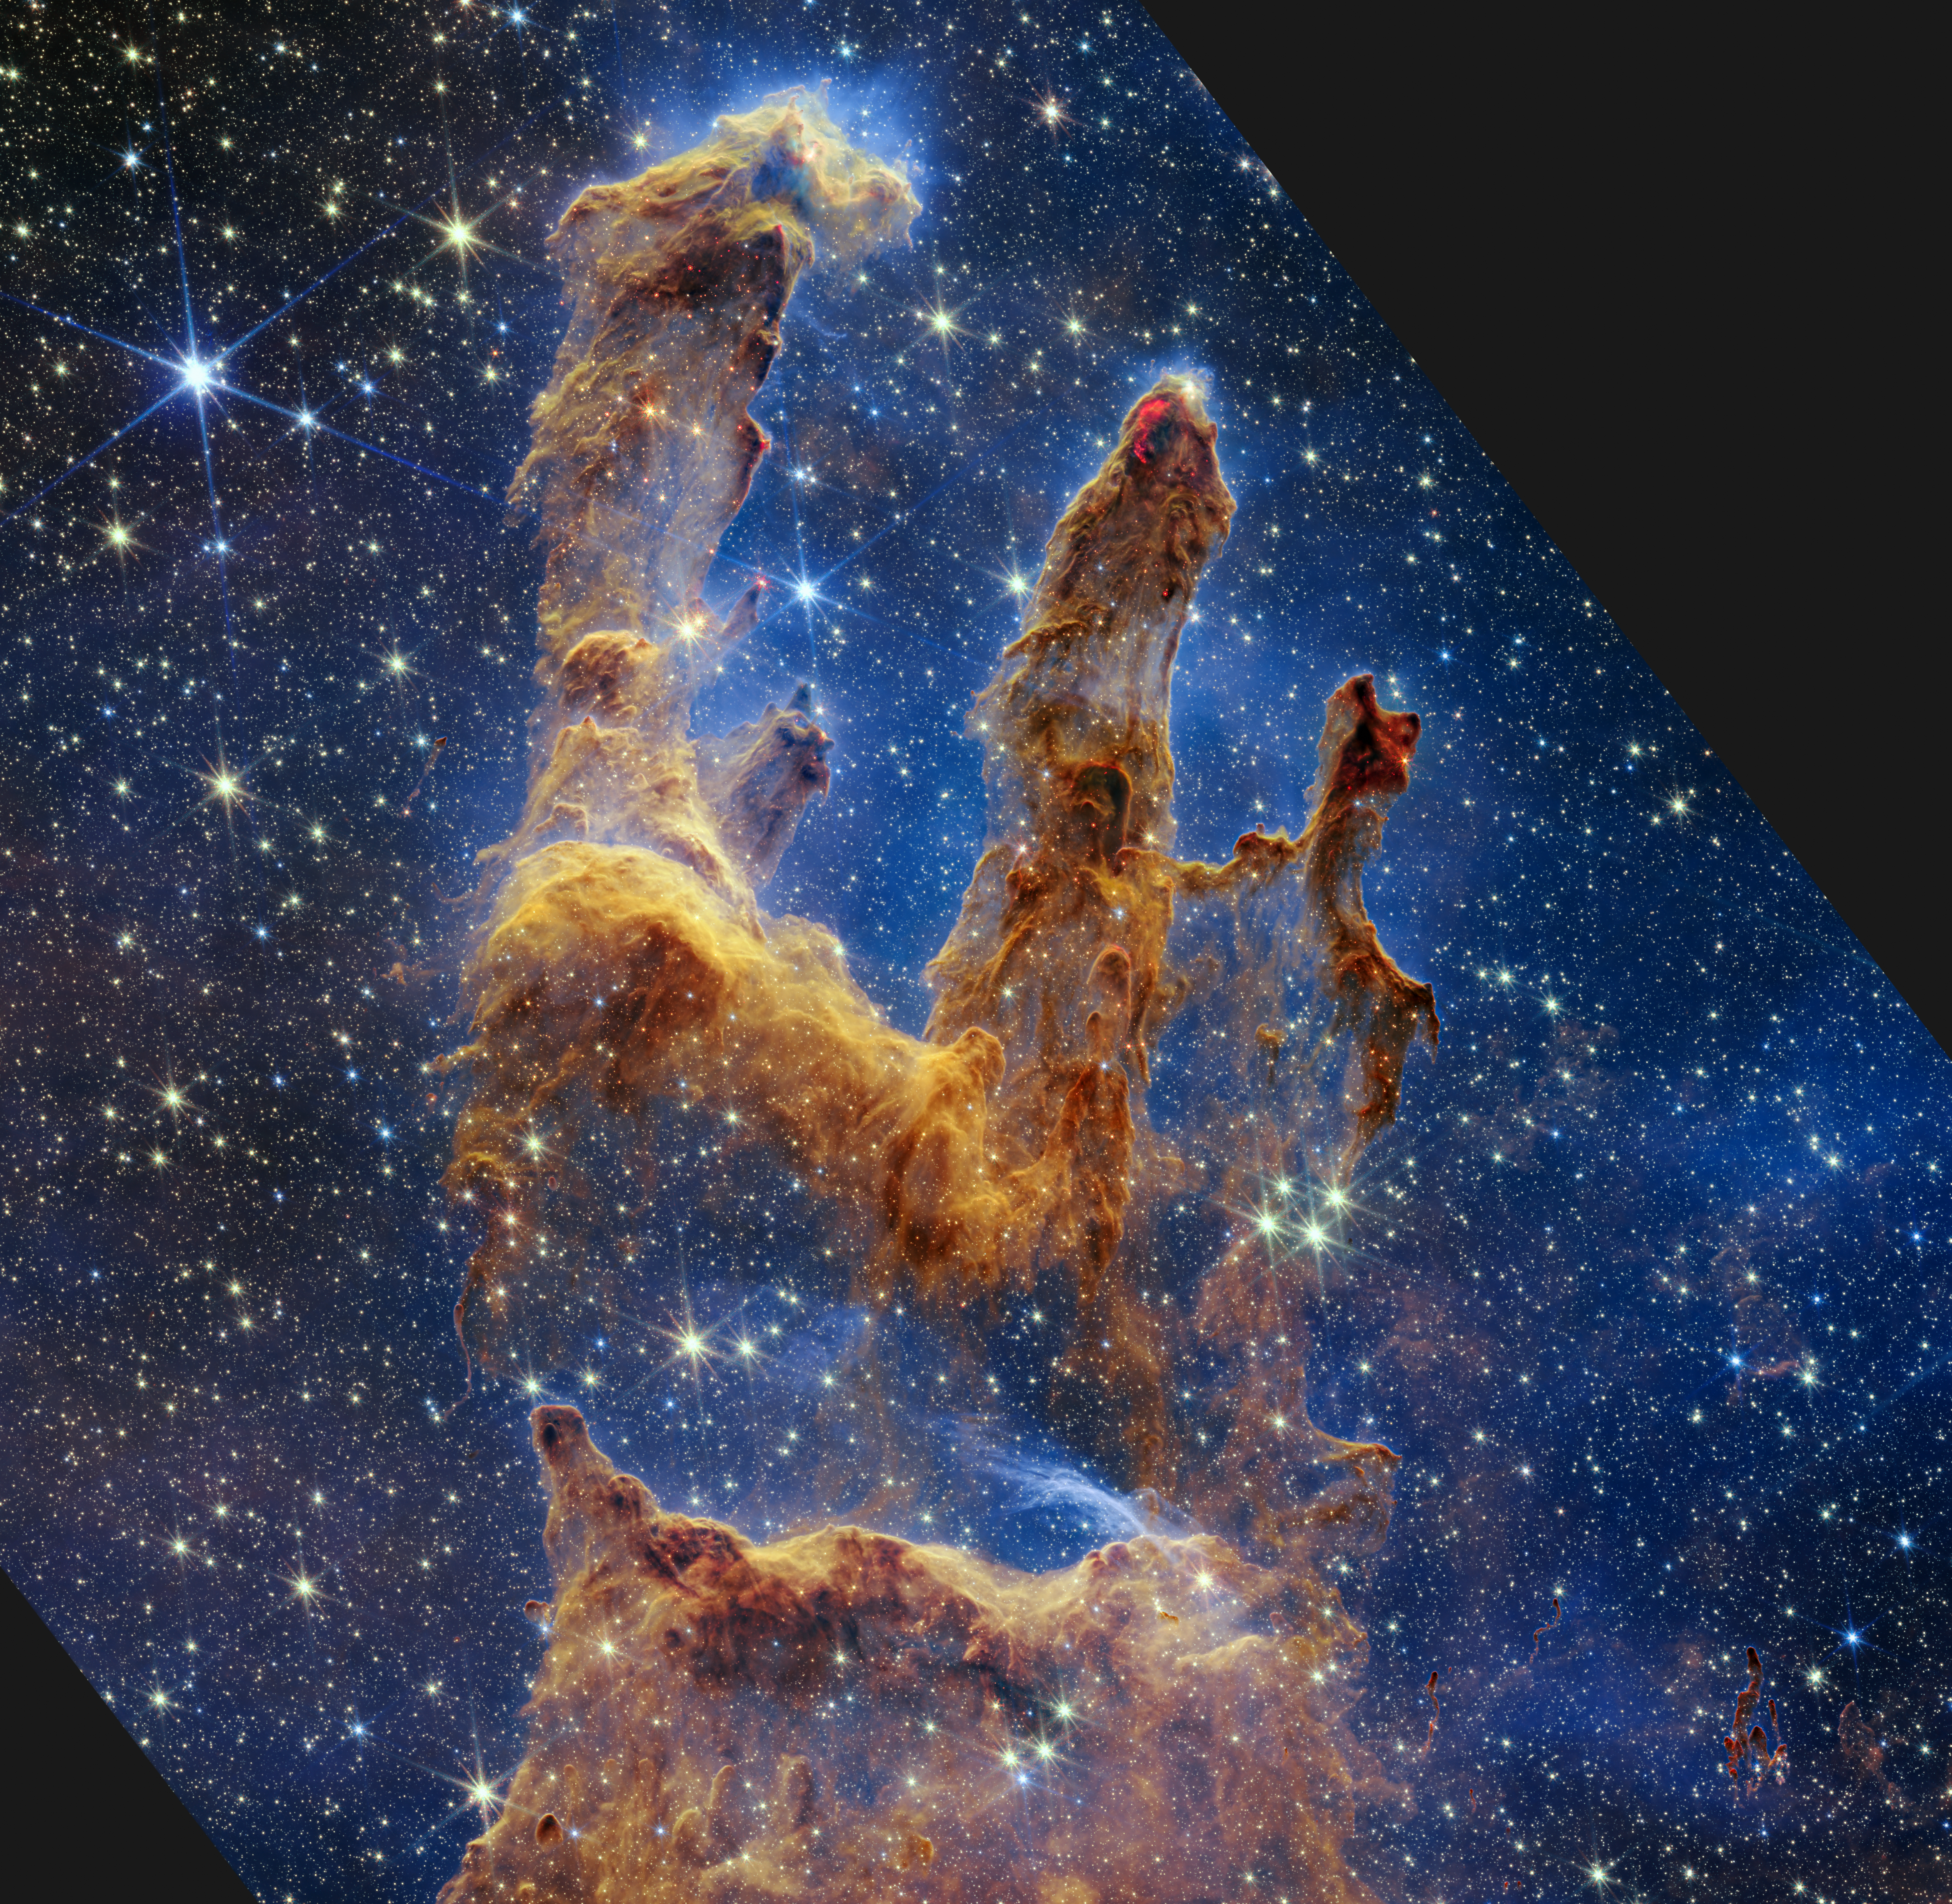 An image of the Pillars of Creation, with orangey-brown dust clouds on a dark blue, starry background. 